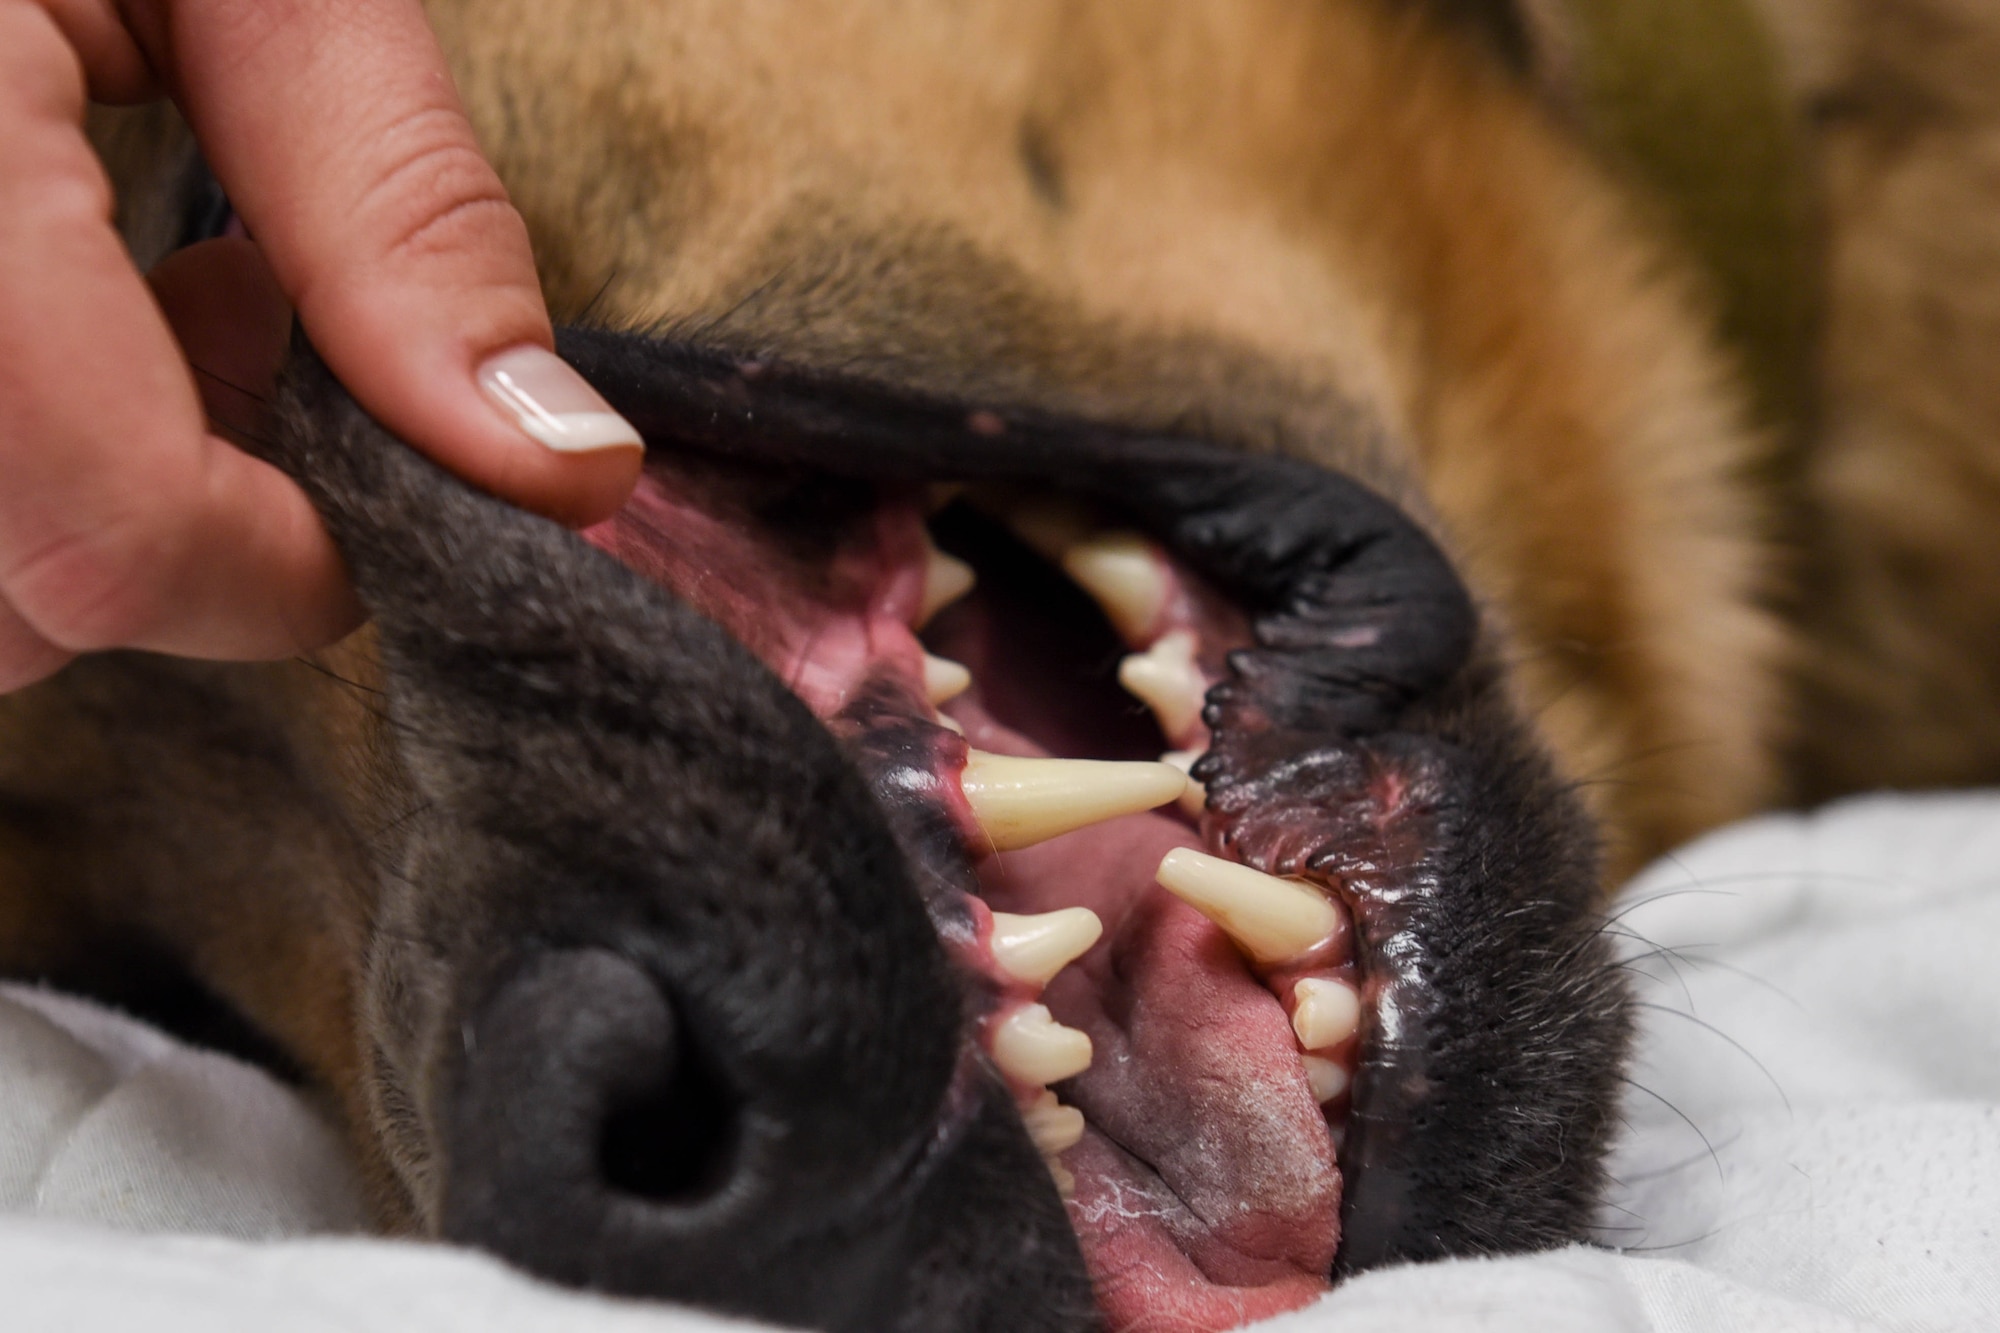 Staff Sgt. Samantha Champion, a 28th Security Forces Squadron military working dog handler, takes a peek at MWD Lezer’s now clean teeth before he wakes up from his procedure at the veterinary clinic on Ellsworth Air Force Base, S.D., Dec. 4, 2018. Teeth cleanings are important, not only for the MWDs’ health and safety but also to make sure that they can stay on top of their game as they work alongside defenders from the 28th SFS. (U.S. Air Force photo by Airman John Ennis)